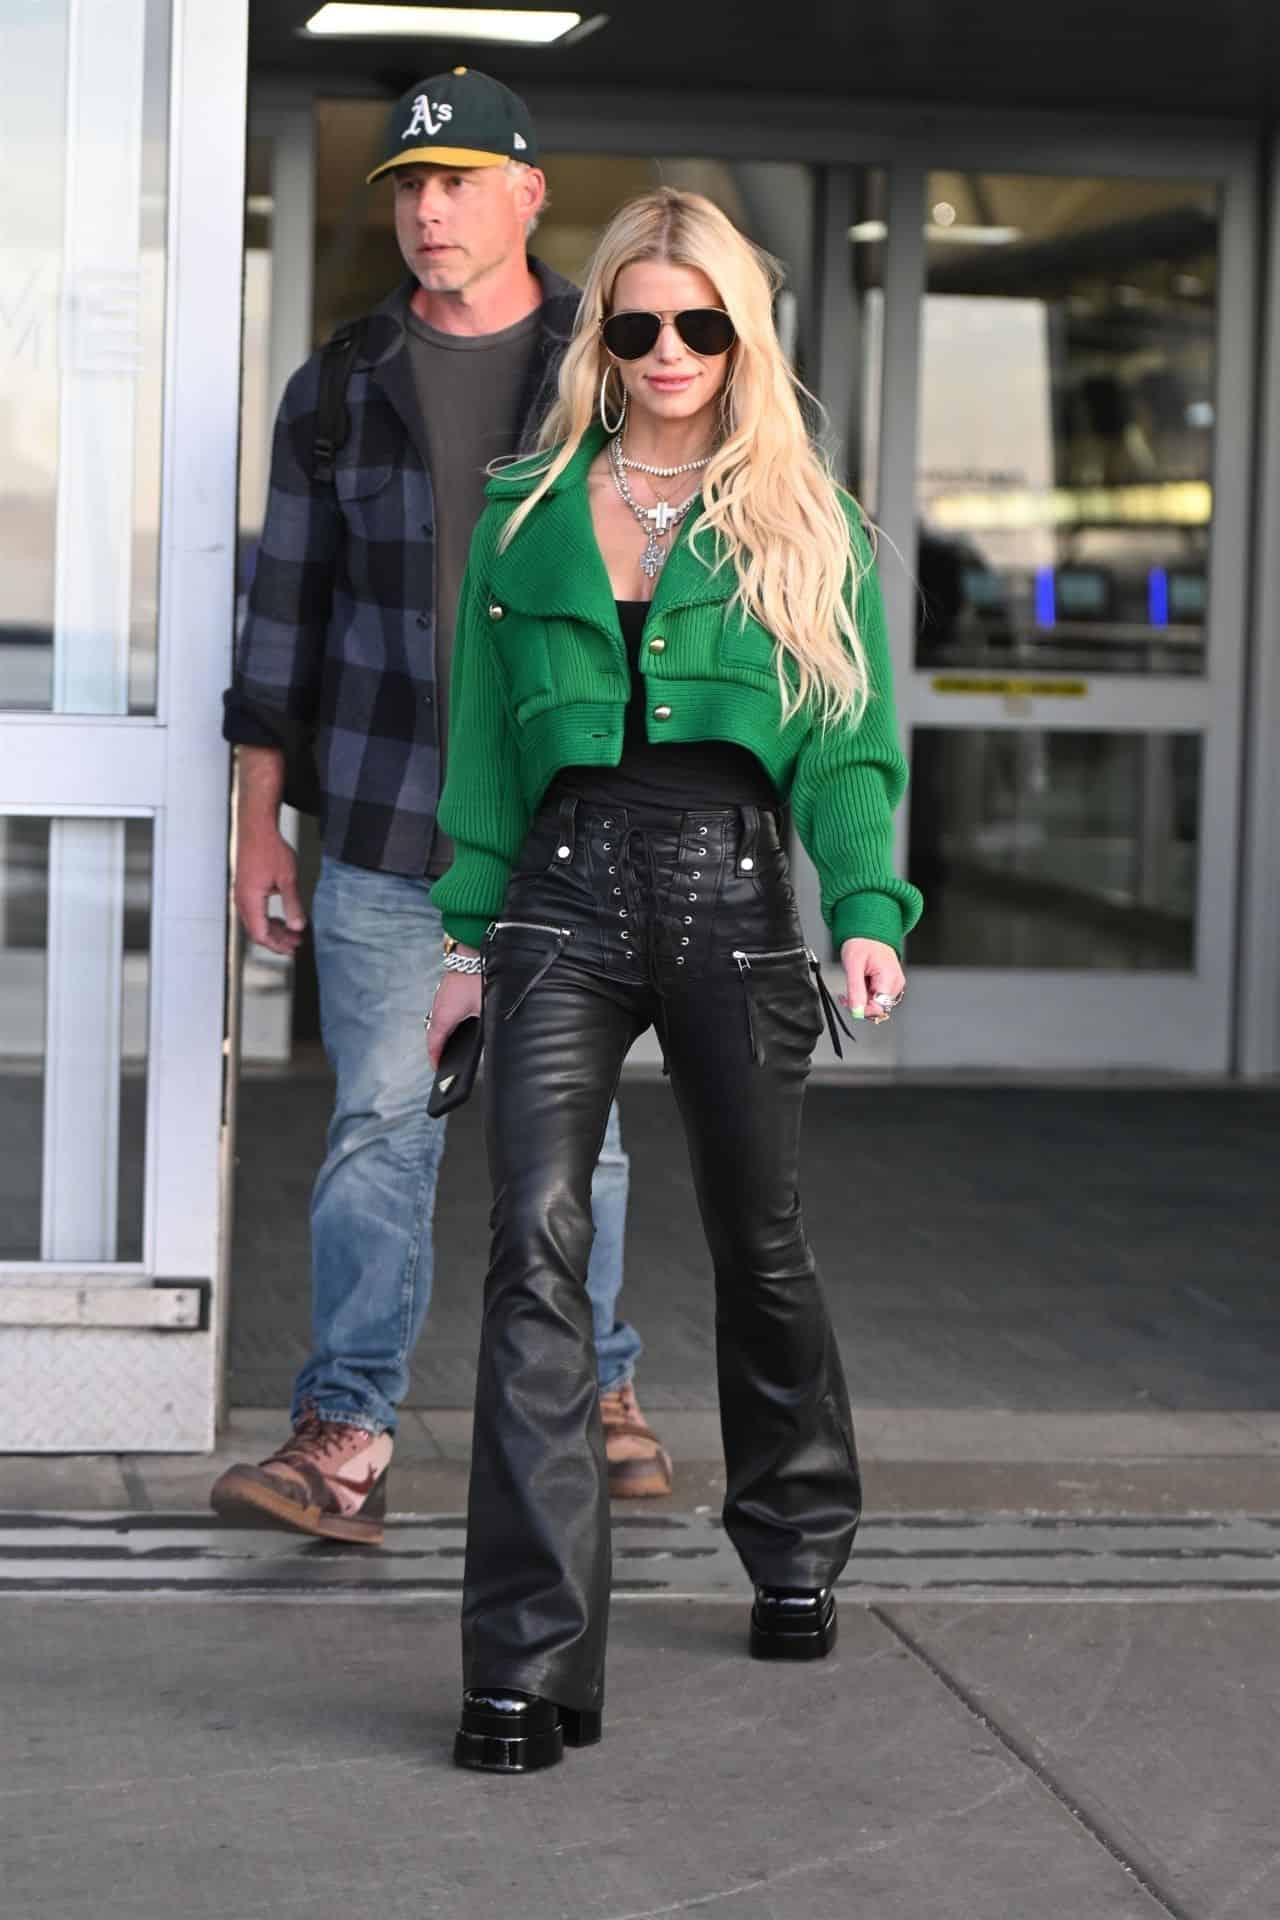 Jessica Simpson Shows Off Svelte Frame in Stylish Ensemble at JFK Airport